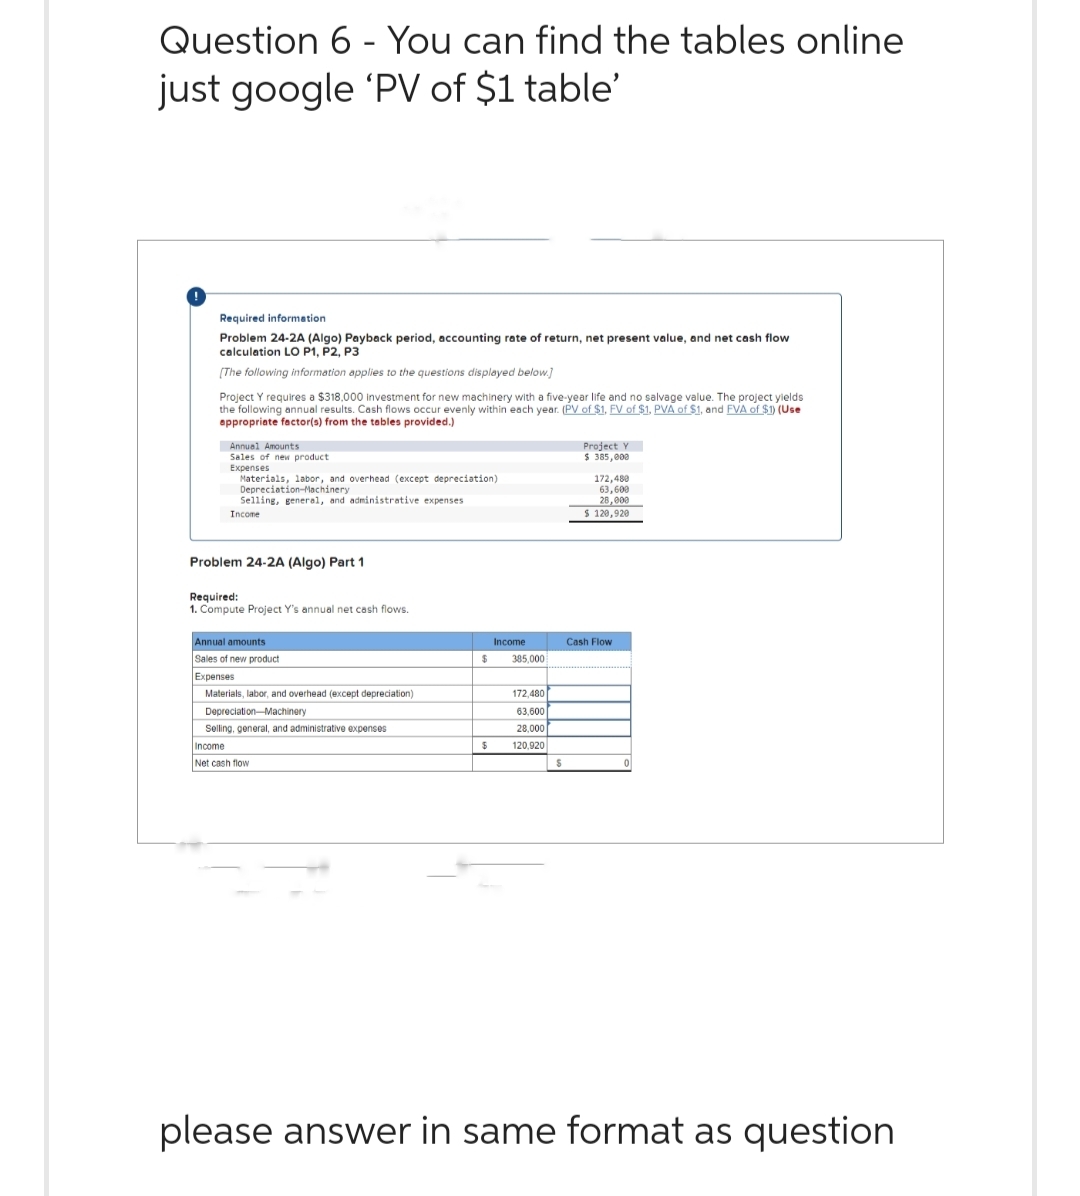 Question 6 - You can find the tables online
just google 'PV of $1 table'
Required information
Problem 24-2A (Algo) Payback period, accounting rate of return, net present value, and net cash flow
calculation LO P1, P2, P3
[The following information applies to the questions displayed below.]
Project Y requires a $318,000 investment for new machinery with a five-year life and no salvage value. The project yields
the following annual results. Cash flows occur evenly within each year. (PV of $1, FV of $1. PVA of $1, and FVA of $1) (Use
appropriate factor(s) from the tables provided.)
Annual Amounts
Sales of new product
Expenses
Materials, labor, and overhead (except depreciation)
Depreciation-Machinery
Selling, general, and administrative expenses
Income
Problem 24-2A (Algo) Part 1
Required:
1. Compute Project Y's annual net cash flows.
Annual amounts
Sales of new product
Expenses
Materials, labor, and overhead (except depreciation)
Depreciation Machinery
Selling, general, and administrative expenses
Income
Net cash flow
Income
$ 385,000
$
172,480
63,600
28,000
120,920
$
Project Y
$ 385,000
172,480
63,600
28,000
$ 120,920
Cash Flow
please answer in same format as question